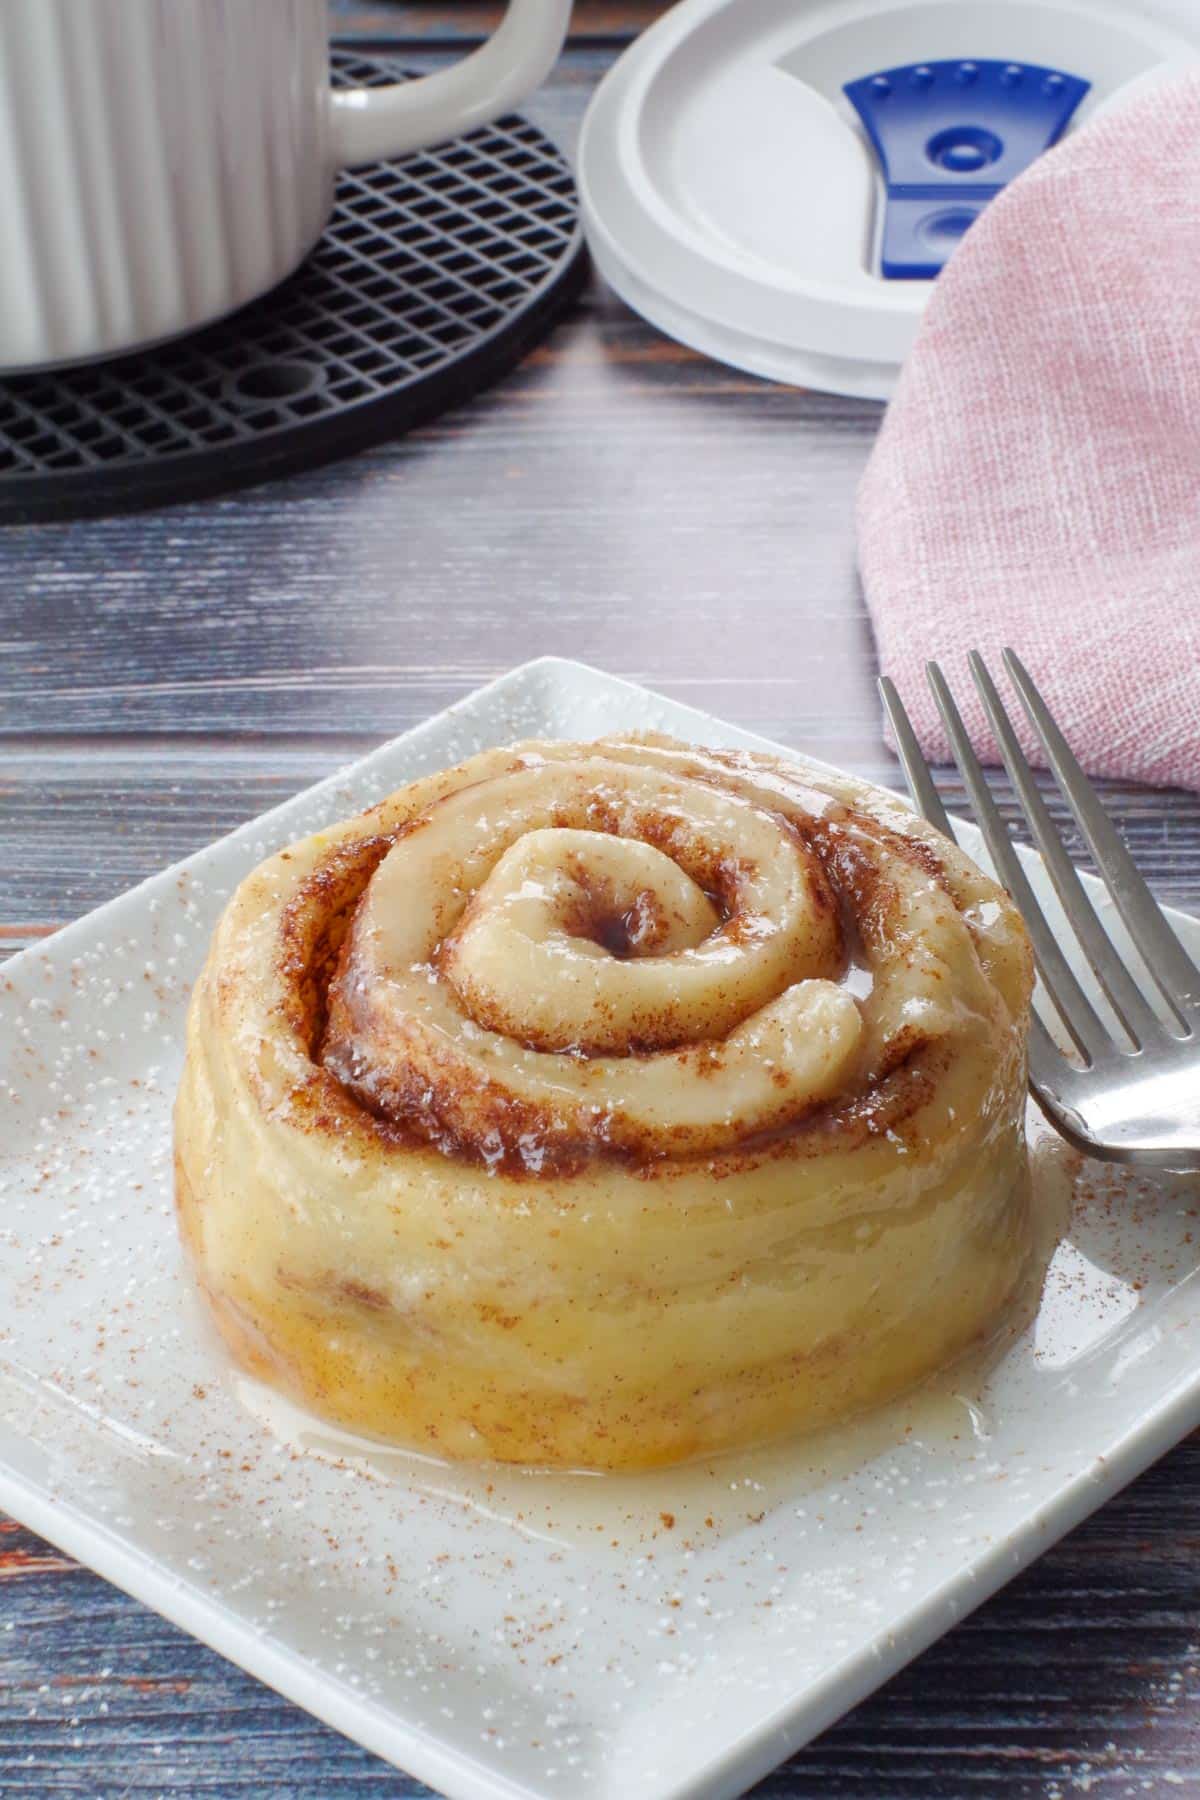 cinnamon roll on a white square plate with a fork, and a meal mug and pink napkin in the background